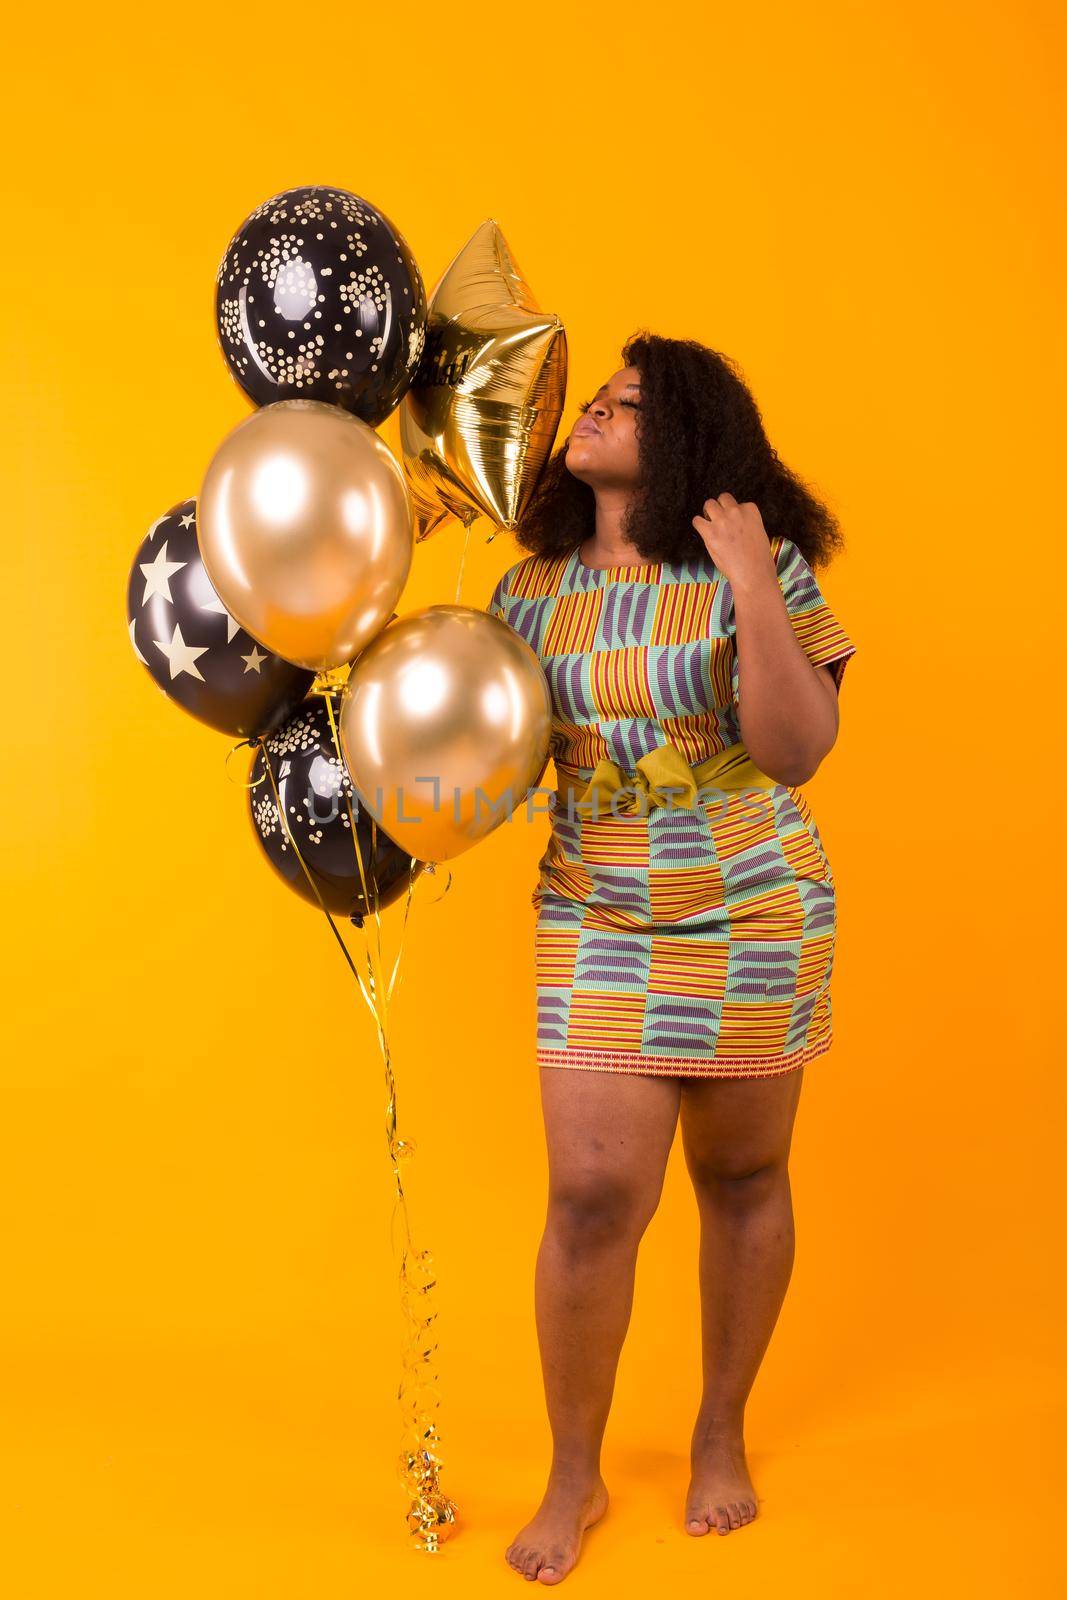 Holidays, birthday party and fun concept - Portrait of smiling young African-American young woman looking sweet on yellow background holding balloons. by Satura86